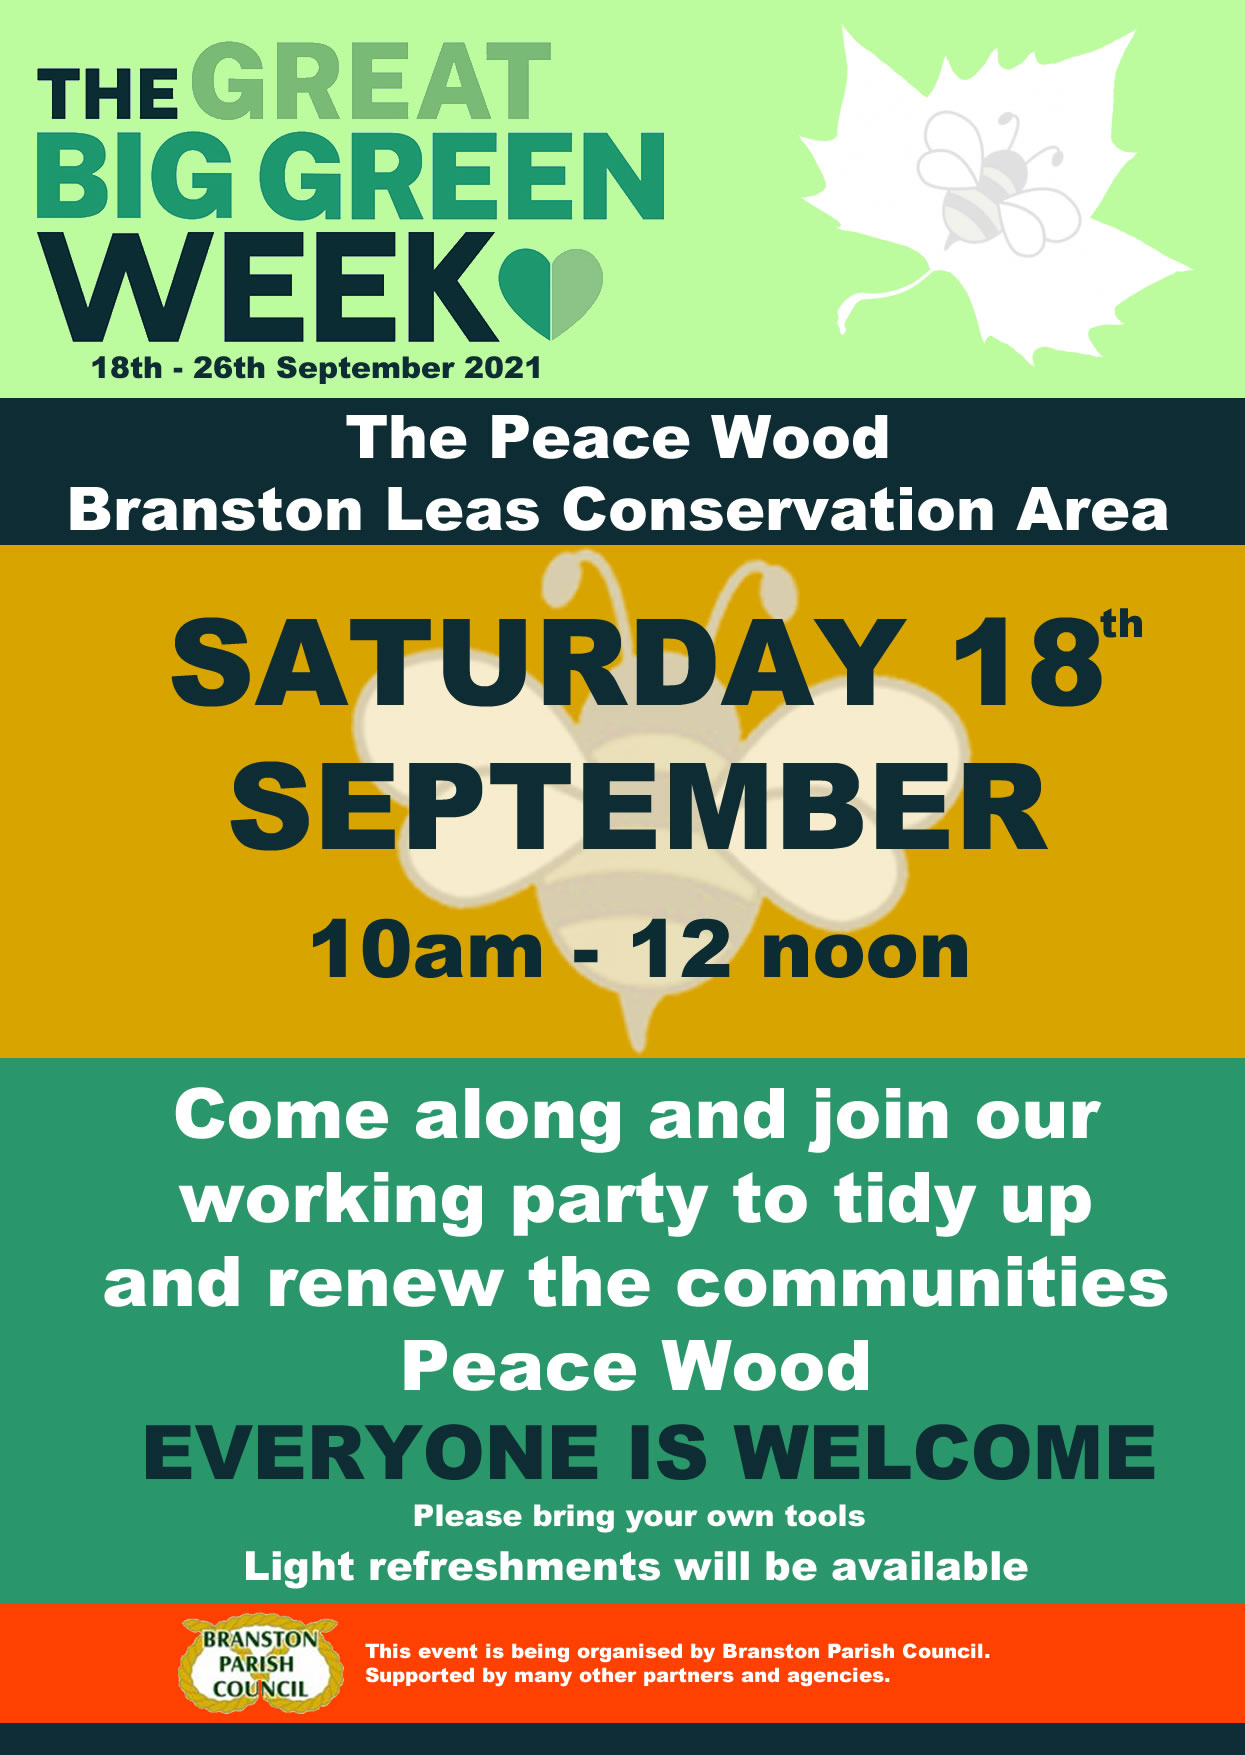 The Great Big Green Week – Peace Wood Event